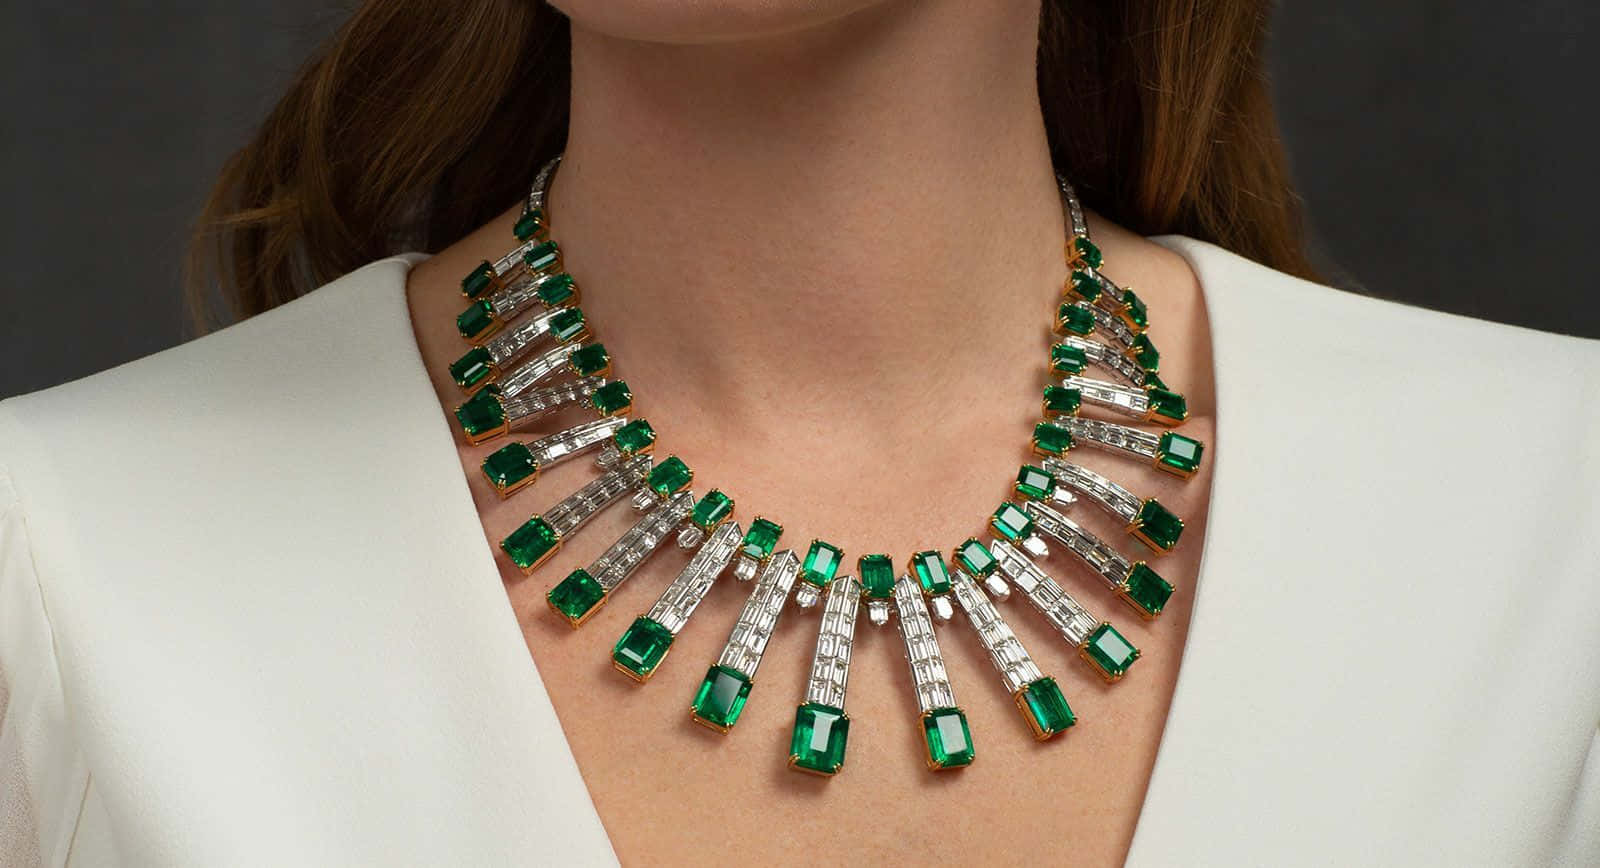 A Woman Wearing A Necklace With Emerald And Diamonds